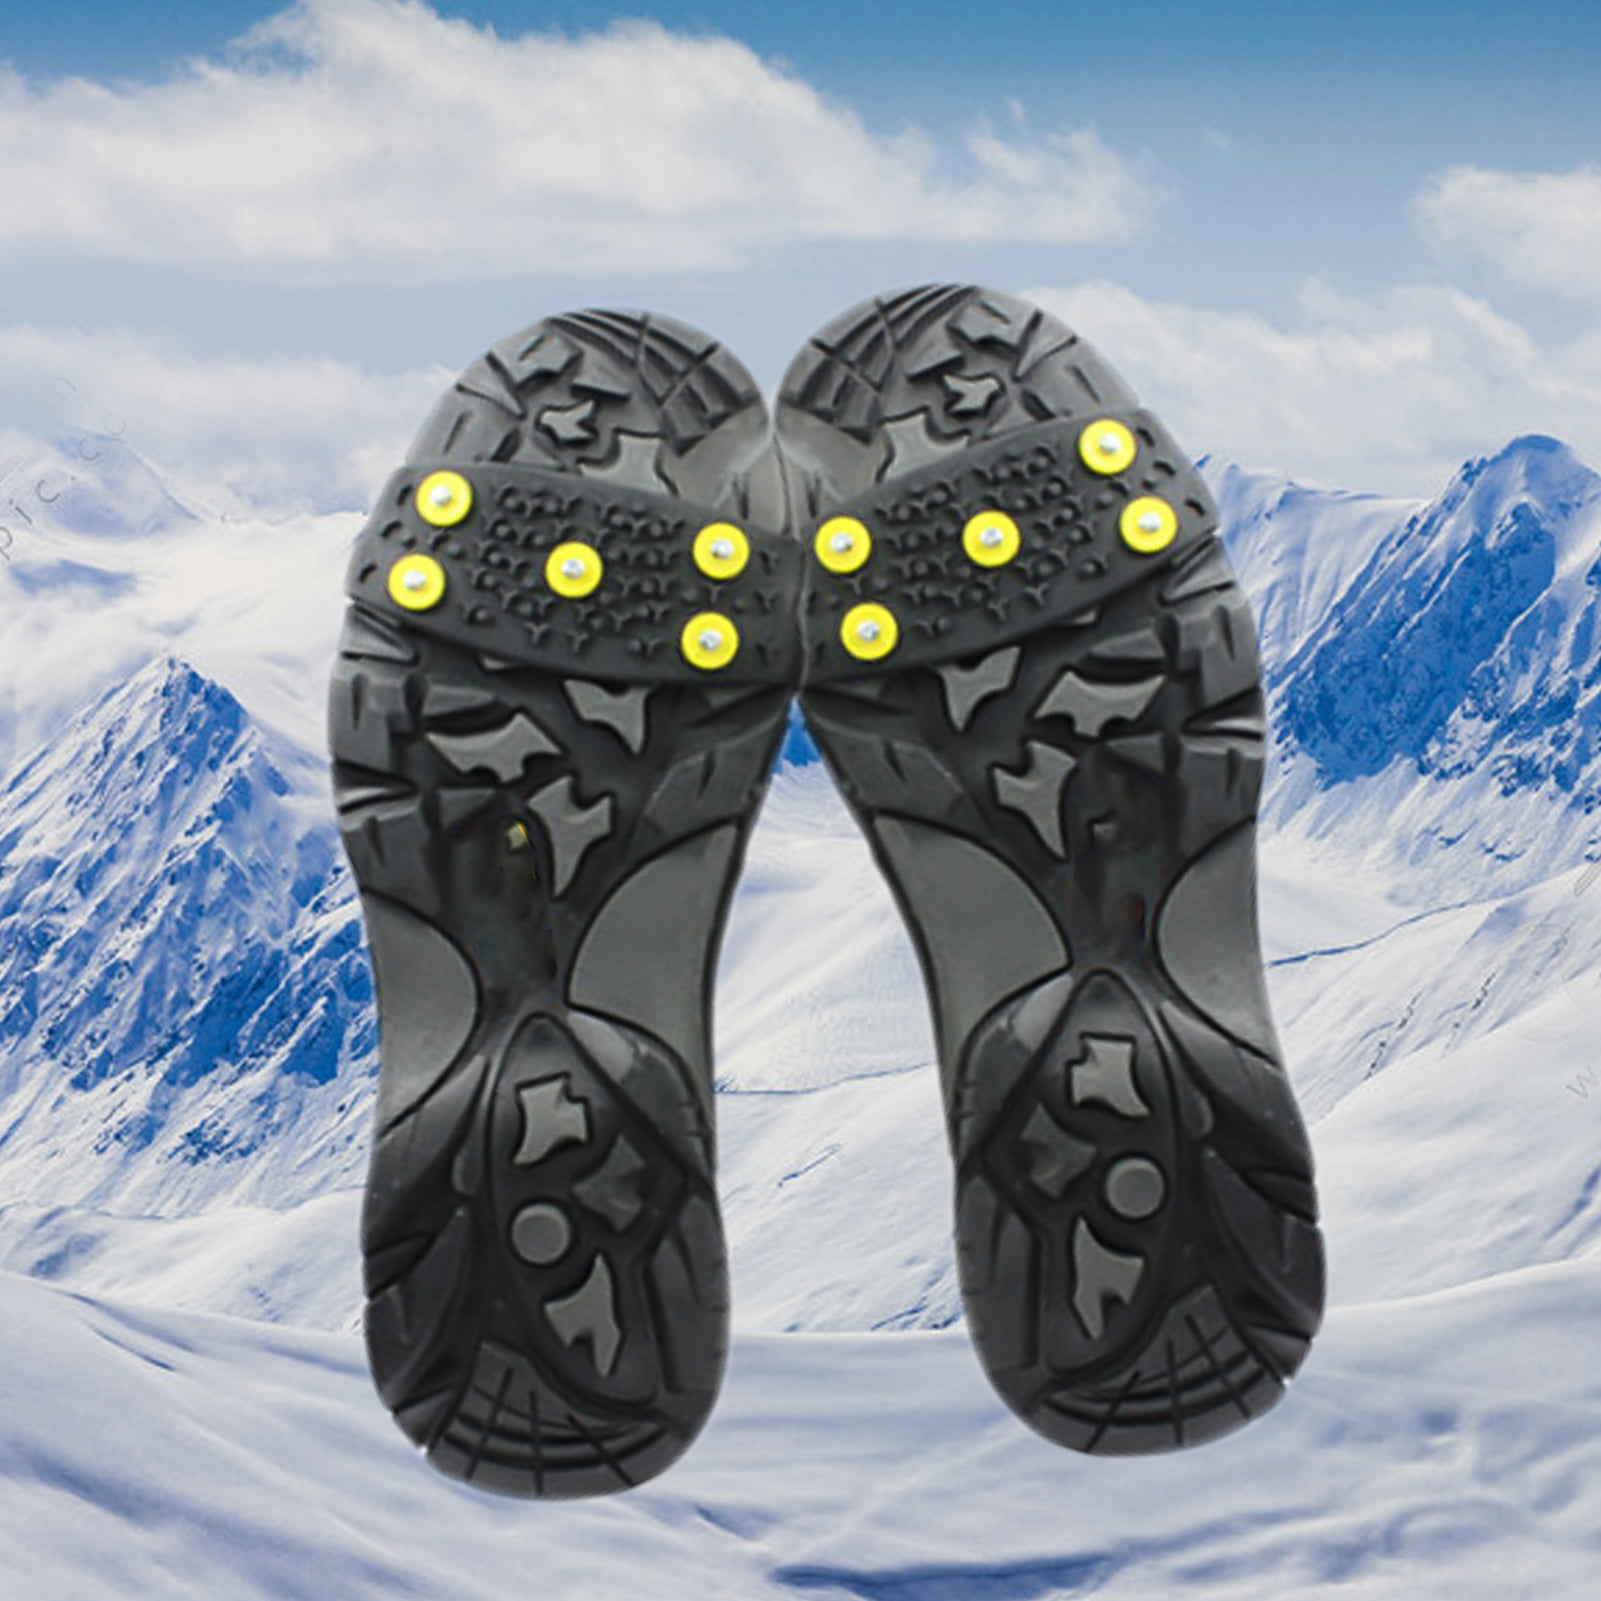 Details about   Sporting goods Outdoor Snow slip 1PC Newest Portable creative tools Crampons JJ 